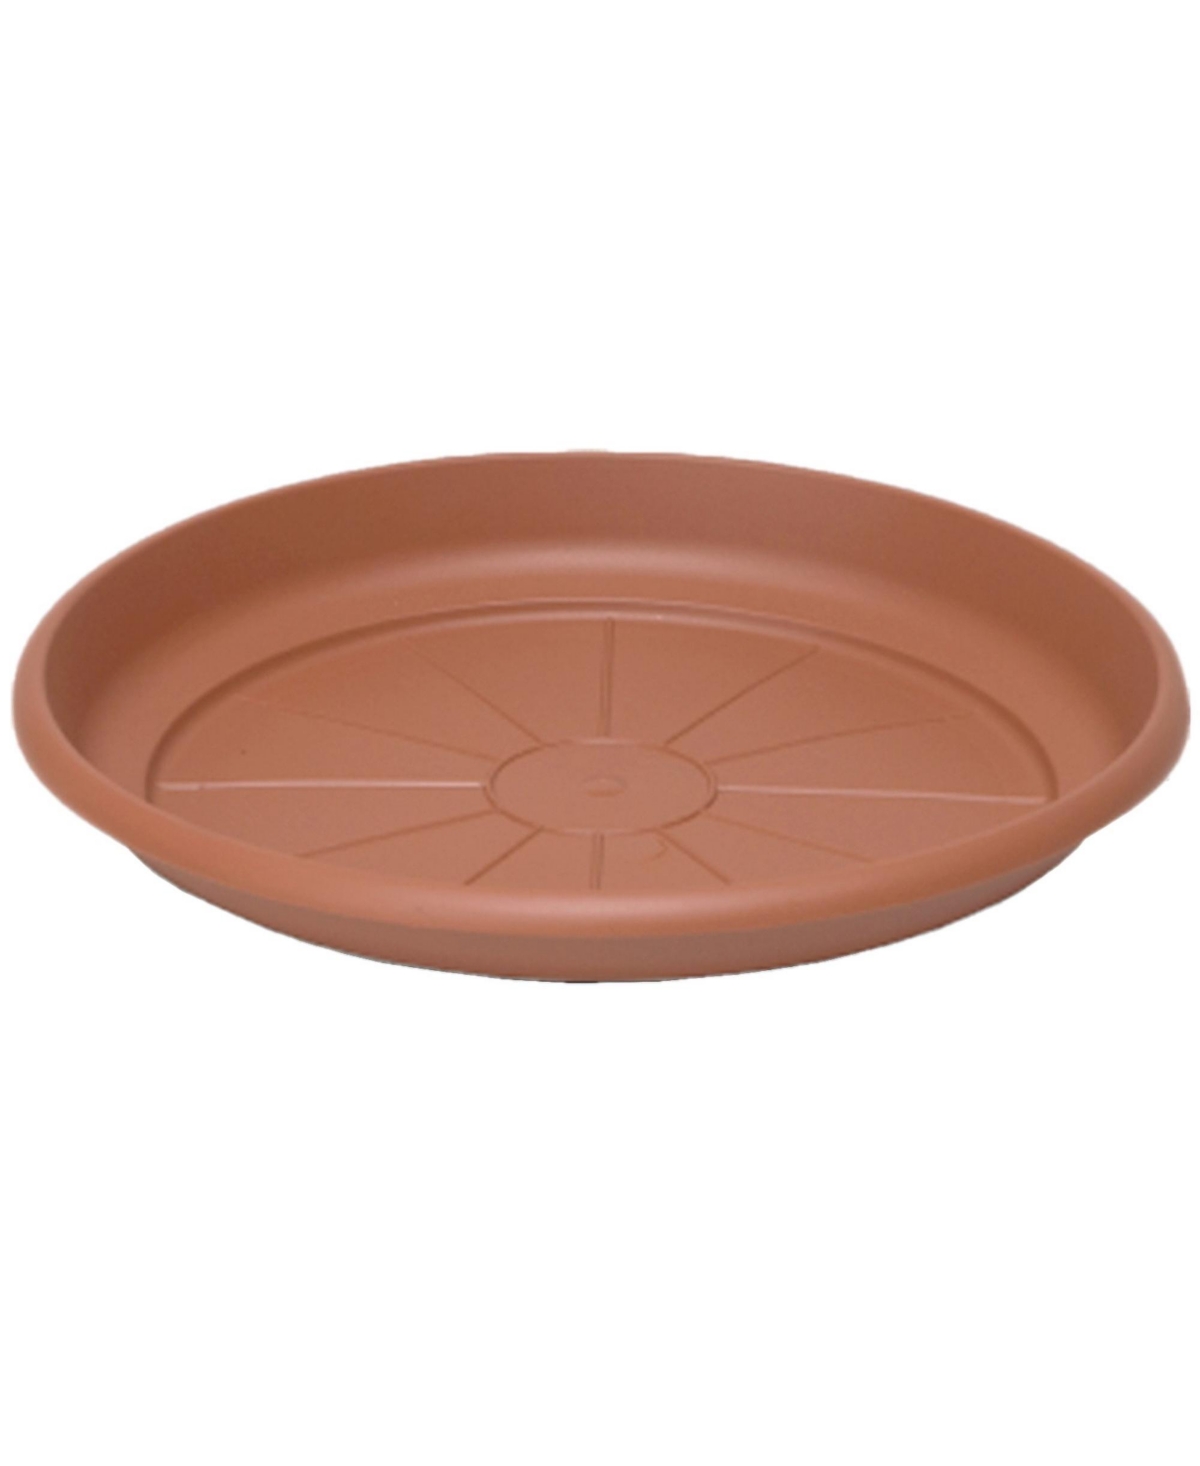 In Outdoor Emma Round Plastic Flower Pot Terracotta Colored Saucer, 13 Inches - Terracotta